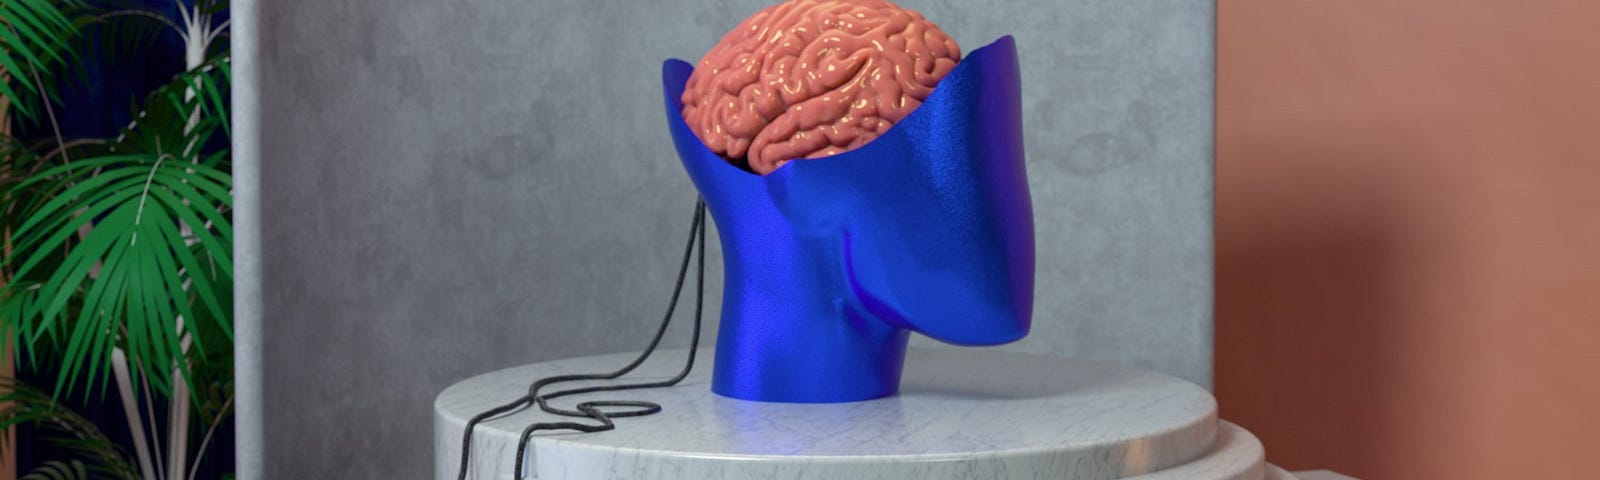 A model of a brain inside a partial head sits on top of a table and is connected by cords to two old-style video game joystick controllers.